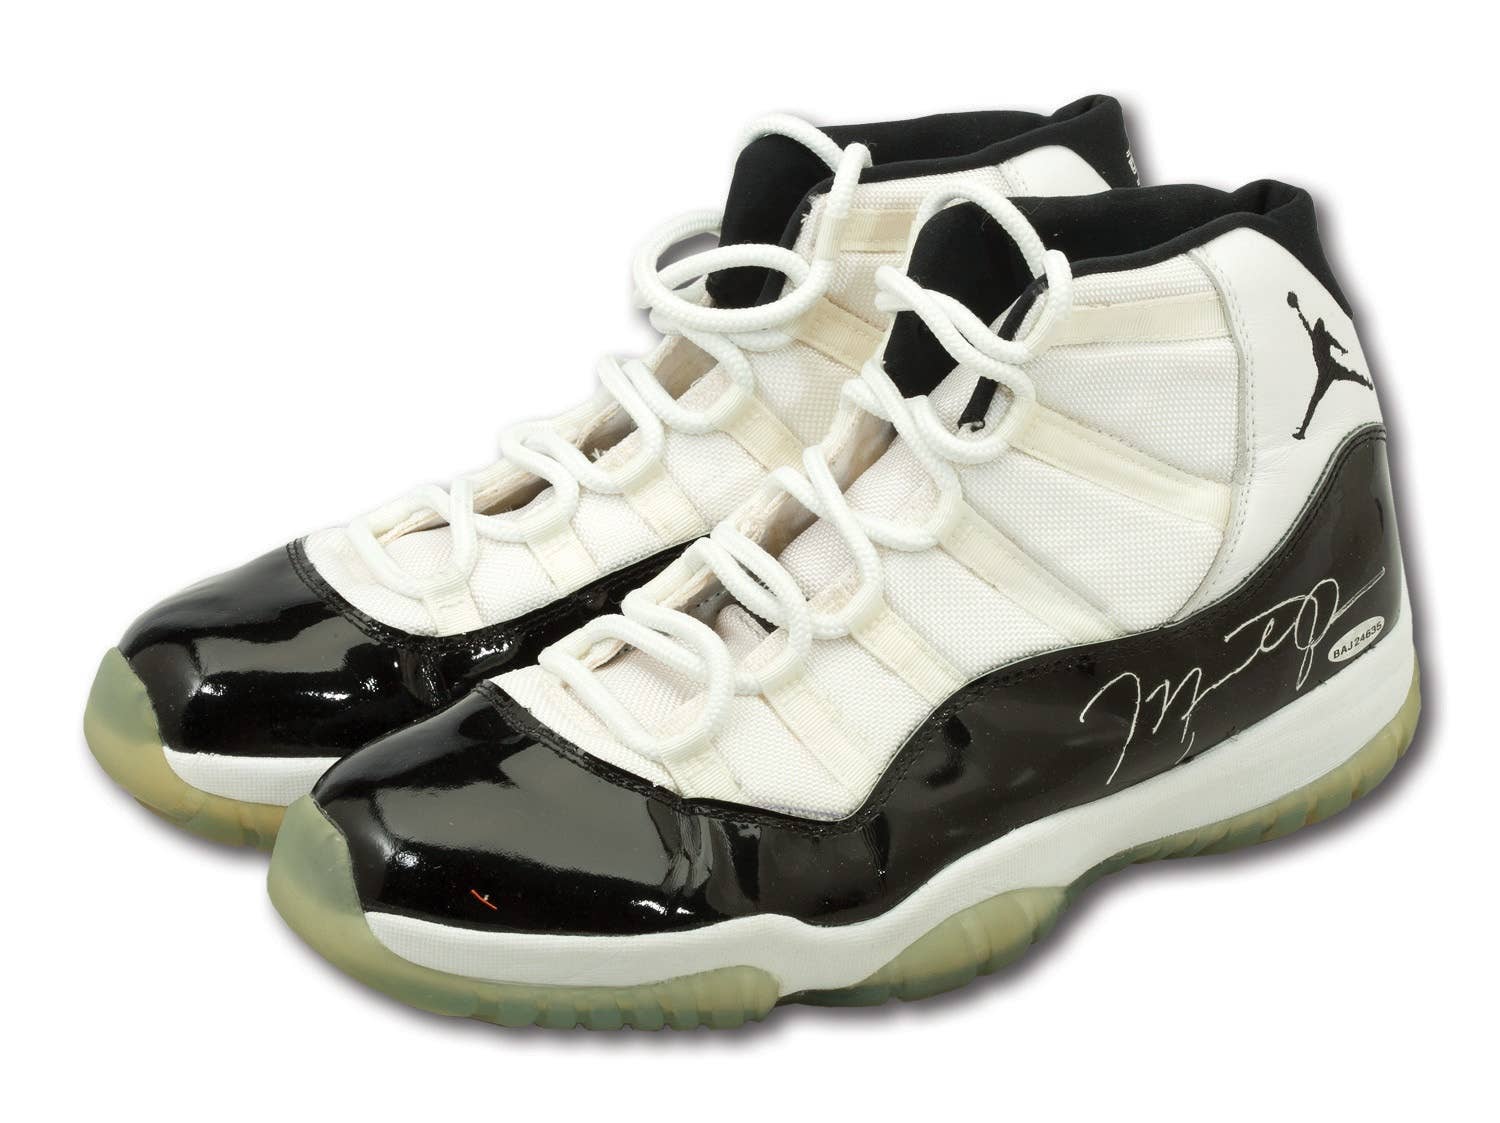 Pinpoint at straffe vegetarisk You Can Buy Michael Jordan's "Concord" 11s | Complex